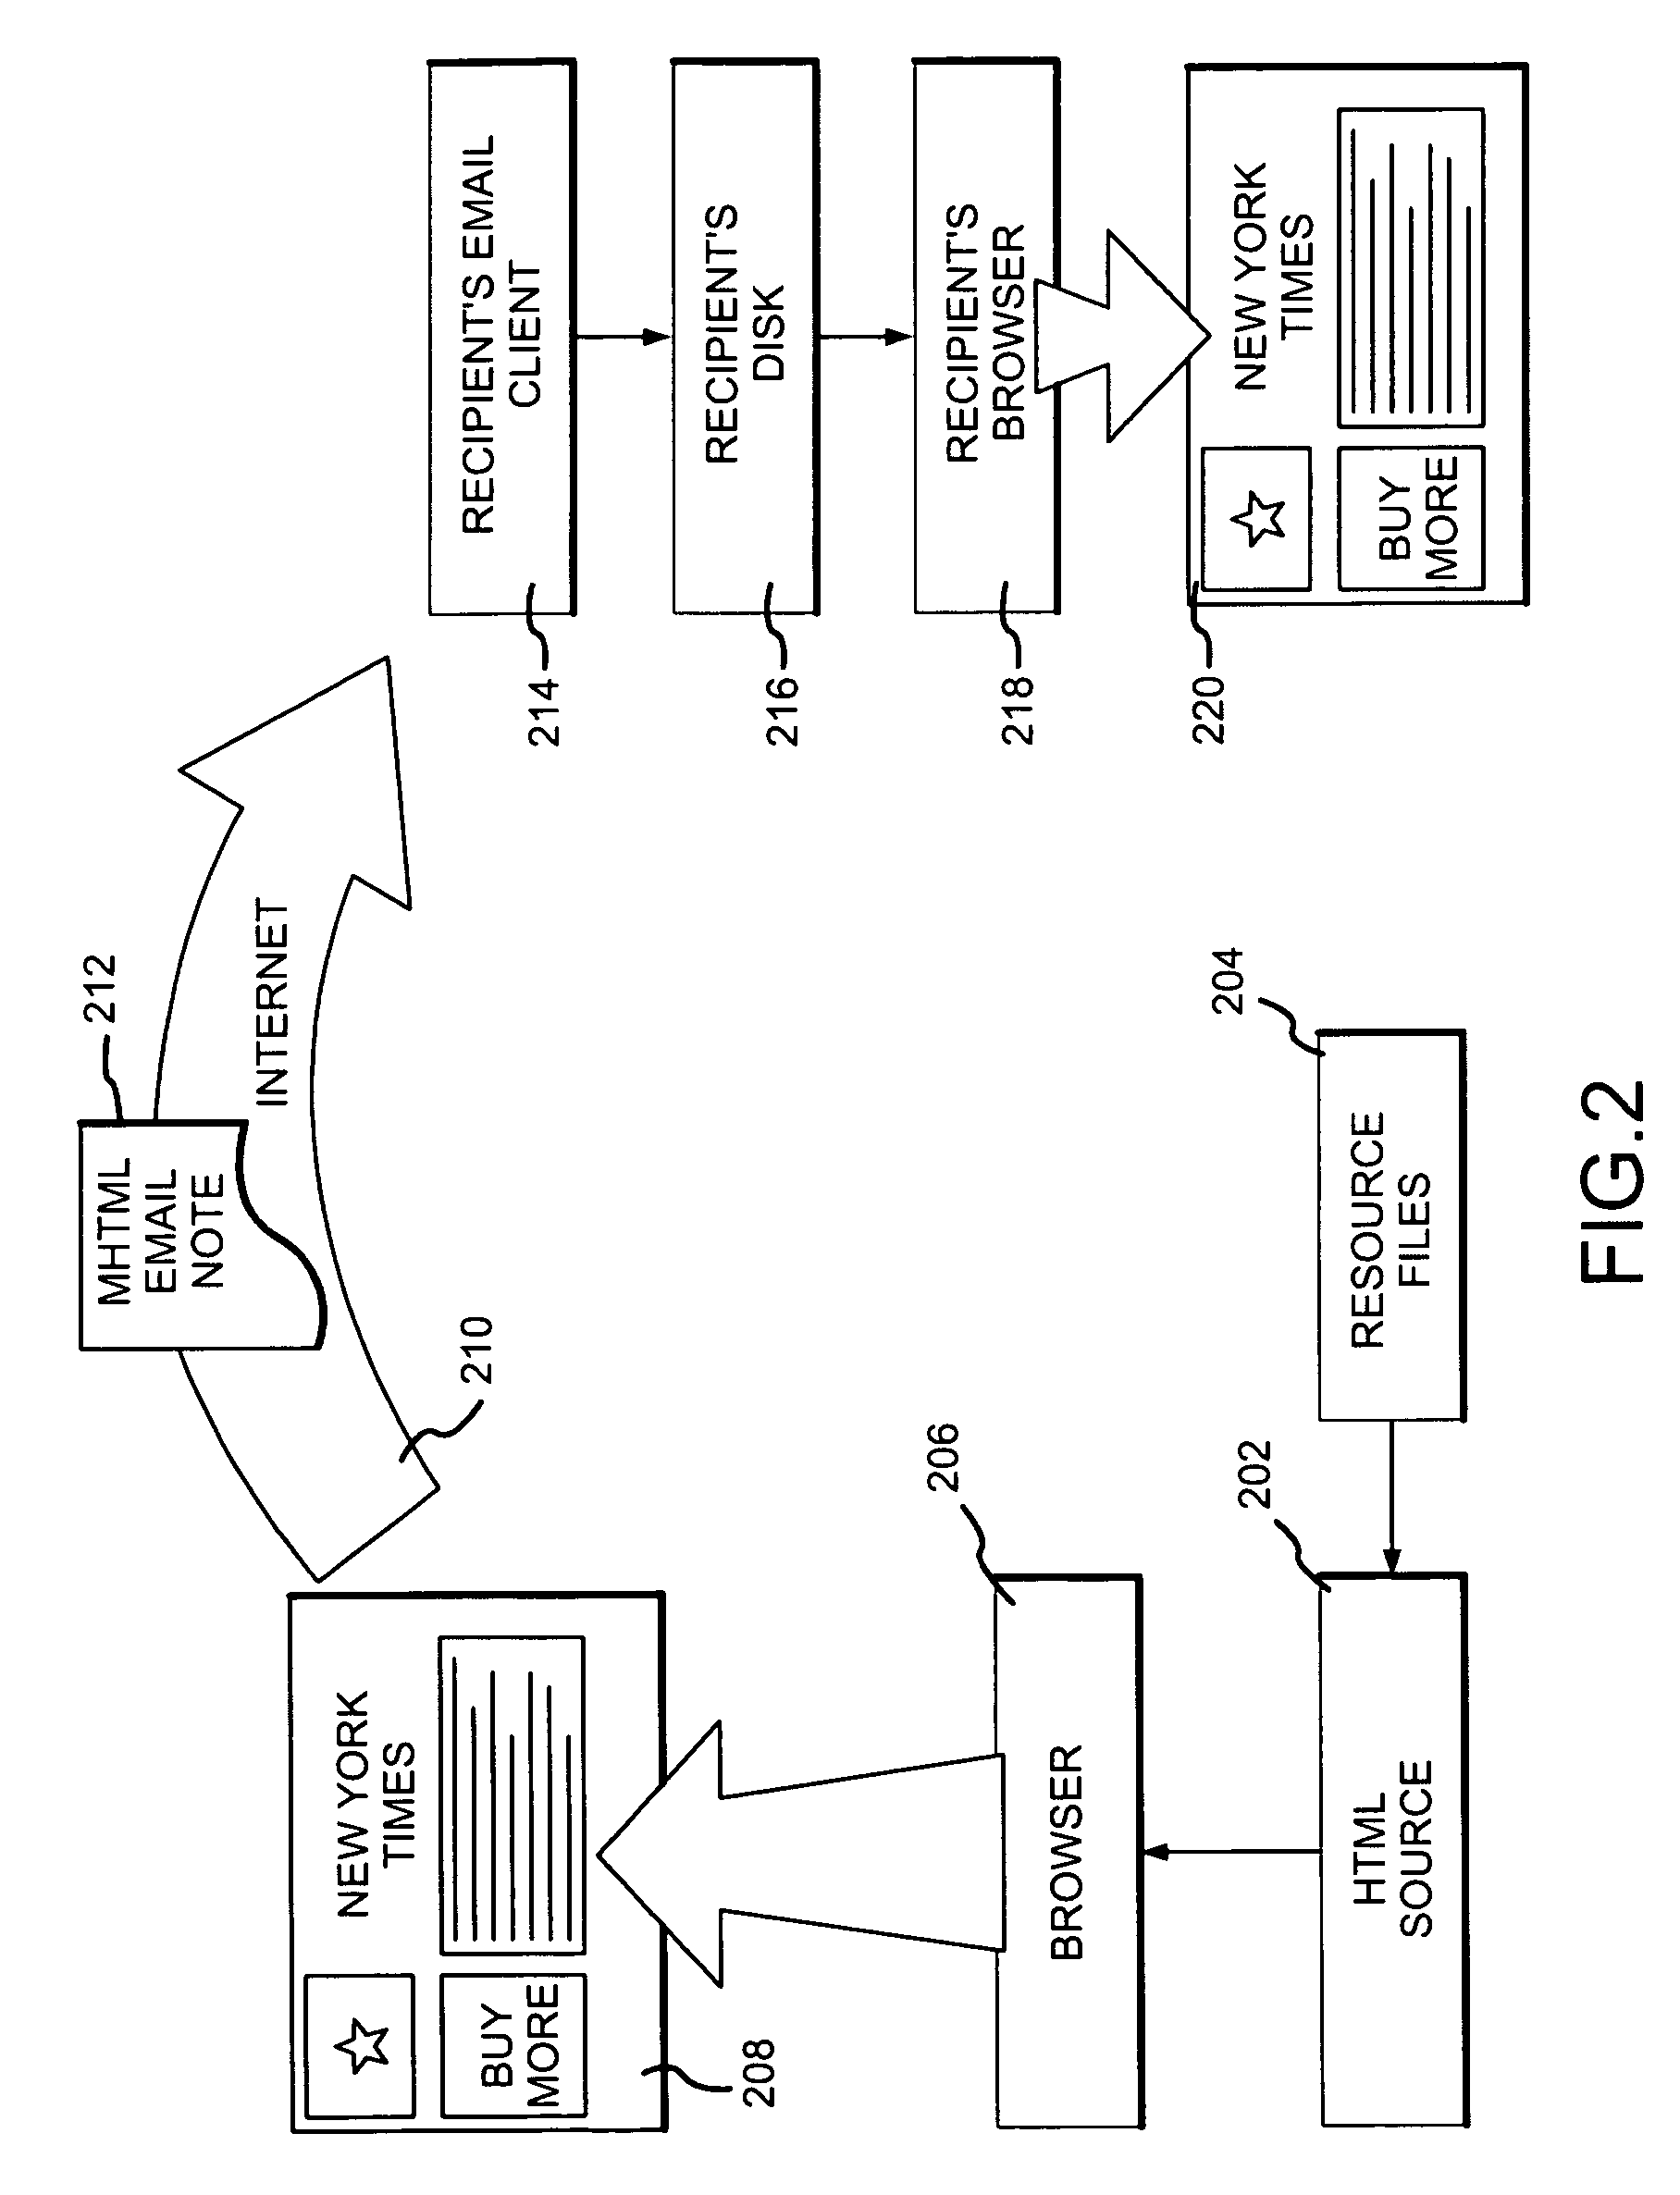 System and method for sending a web page via electronic mail